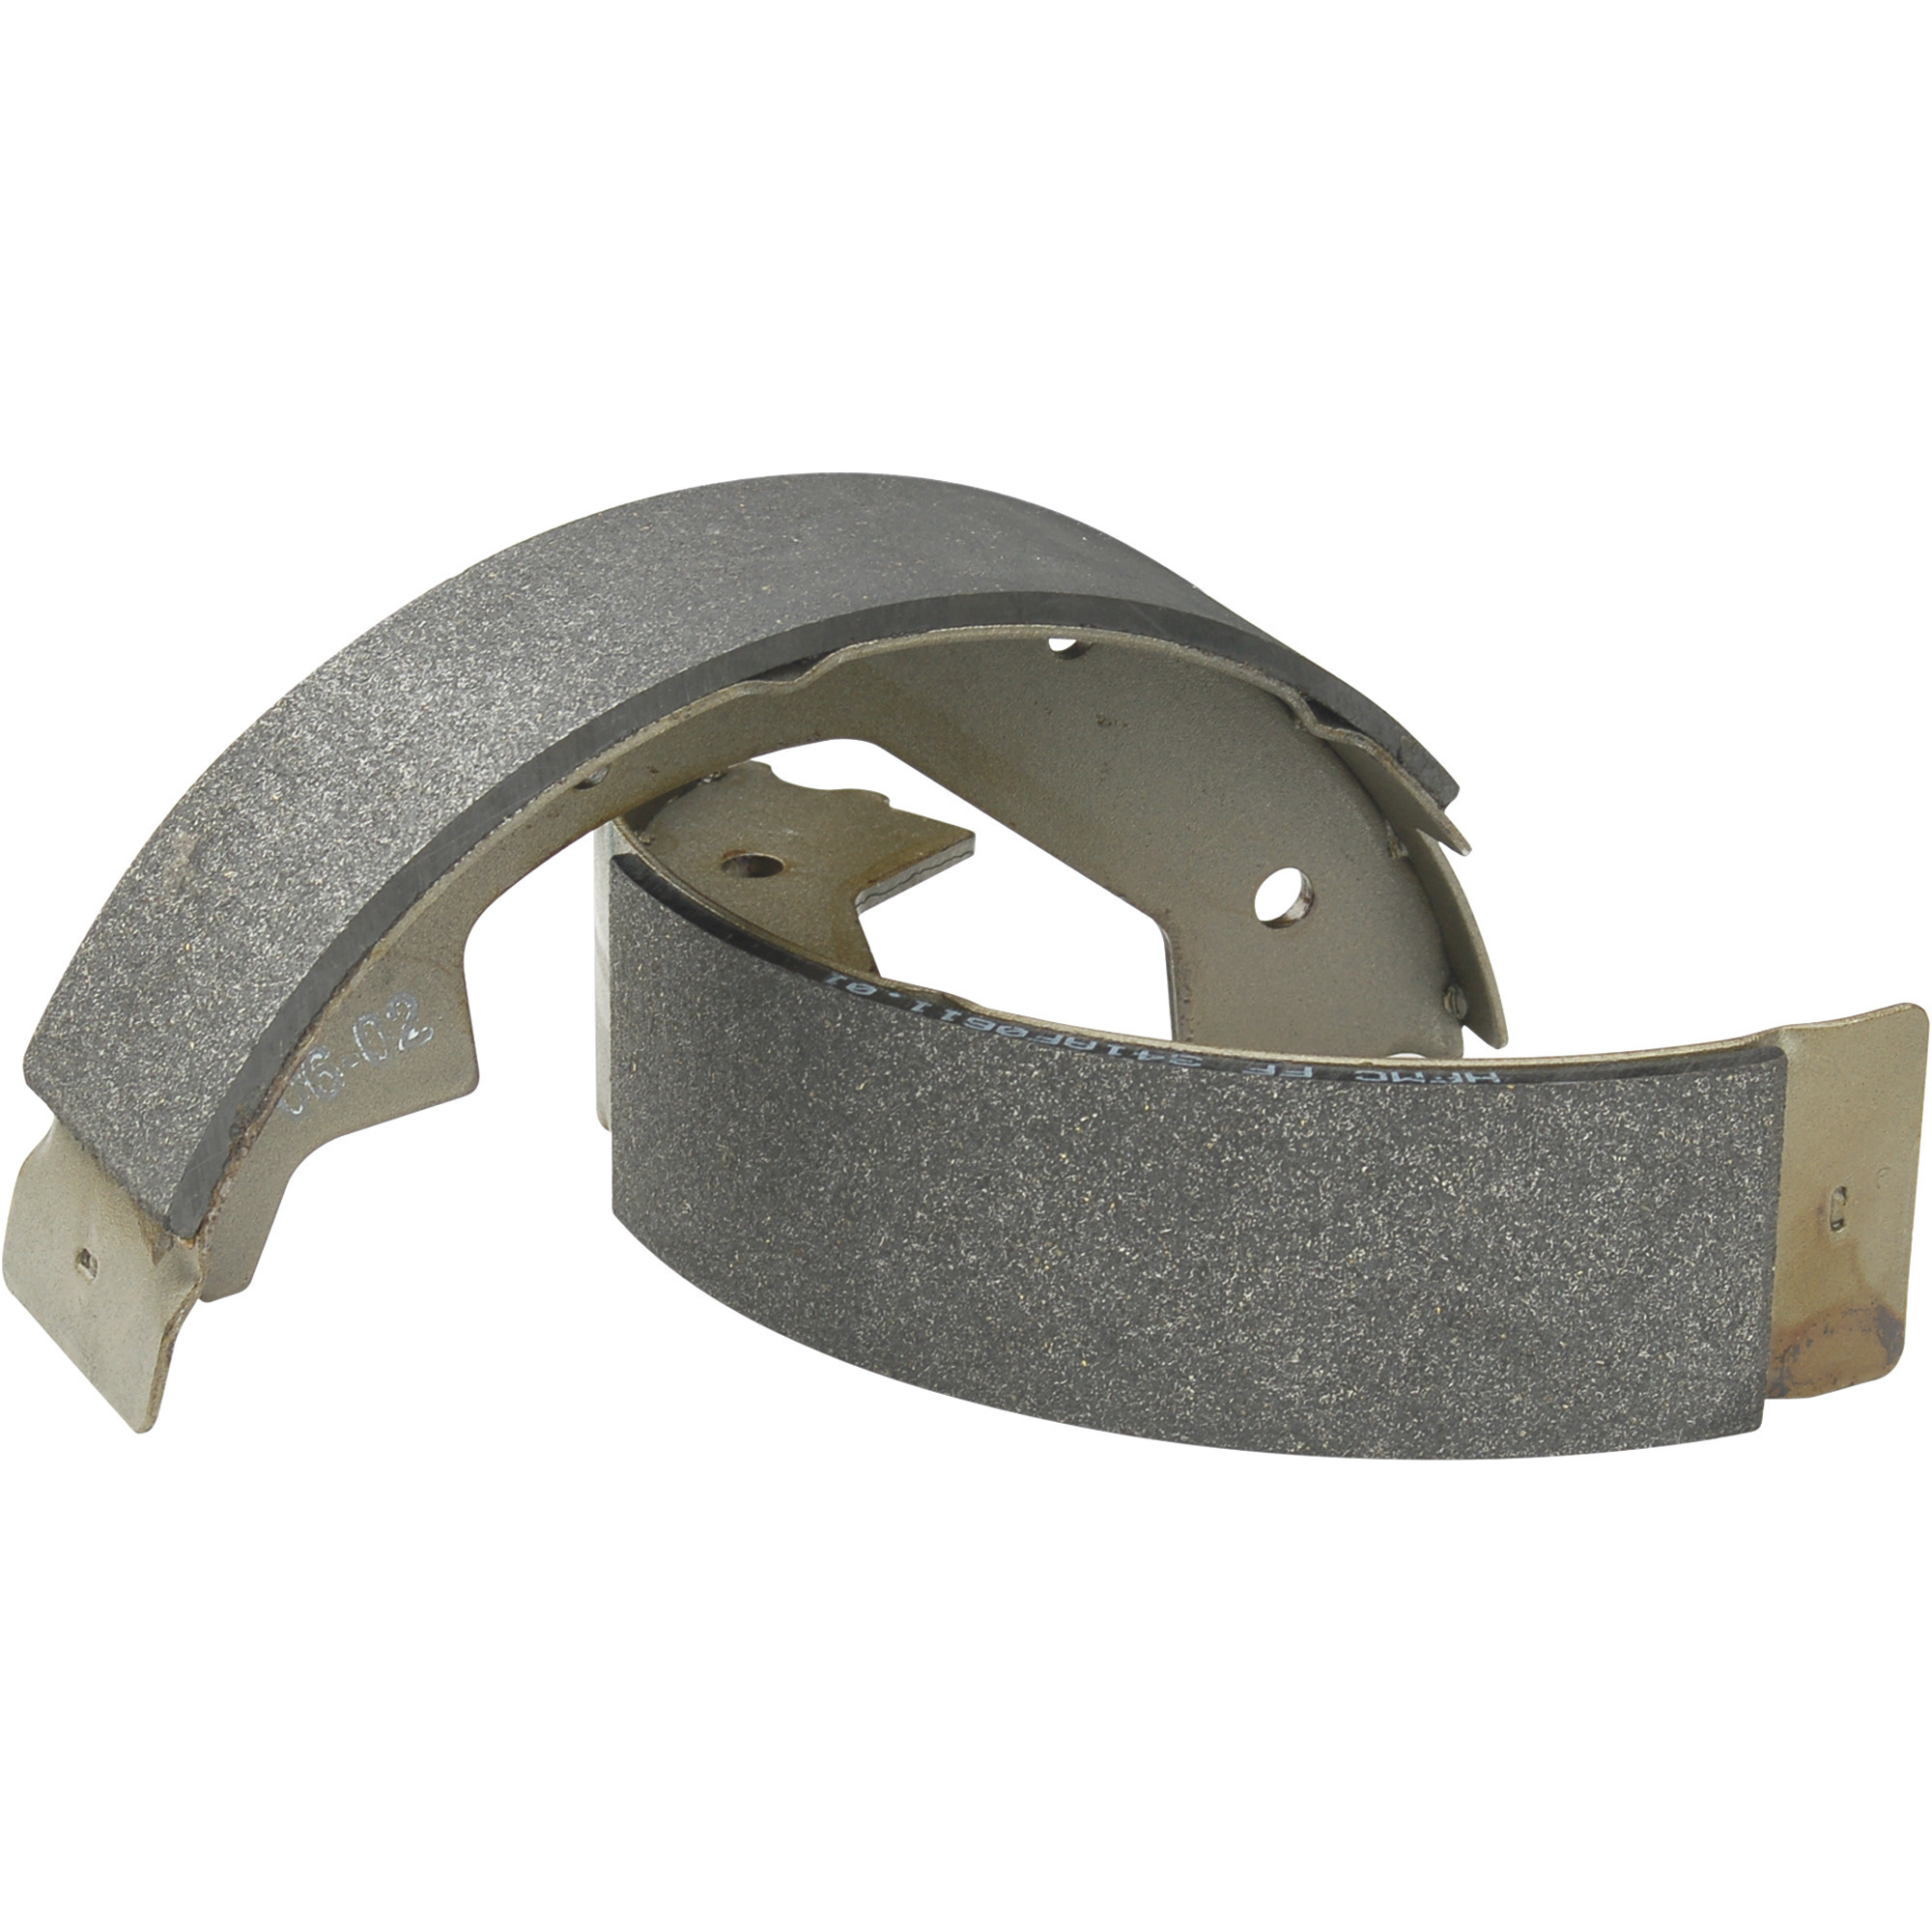 "Dexter Replacement ""Shoe"" Brake Pads, For 12Inch Electric Brake Shoes, Model 86802"